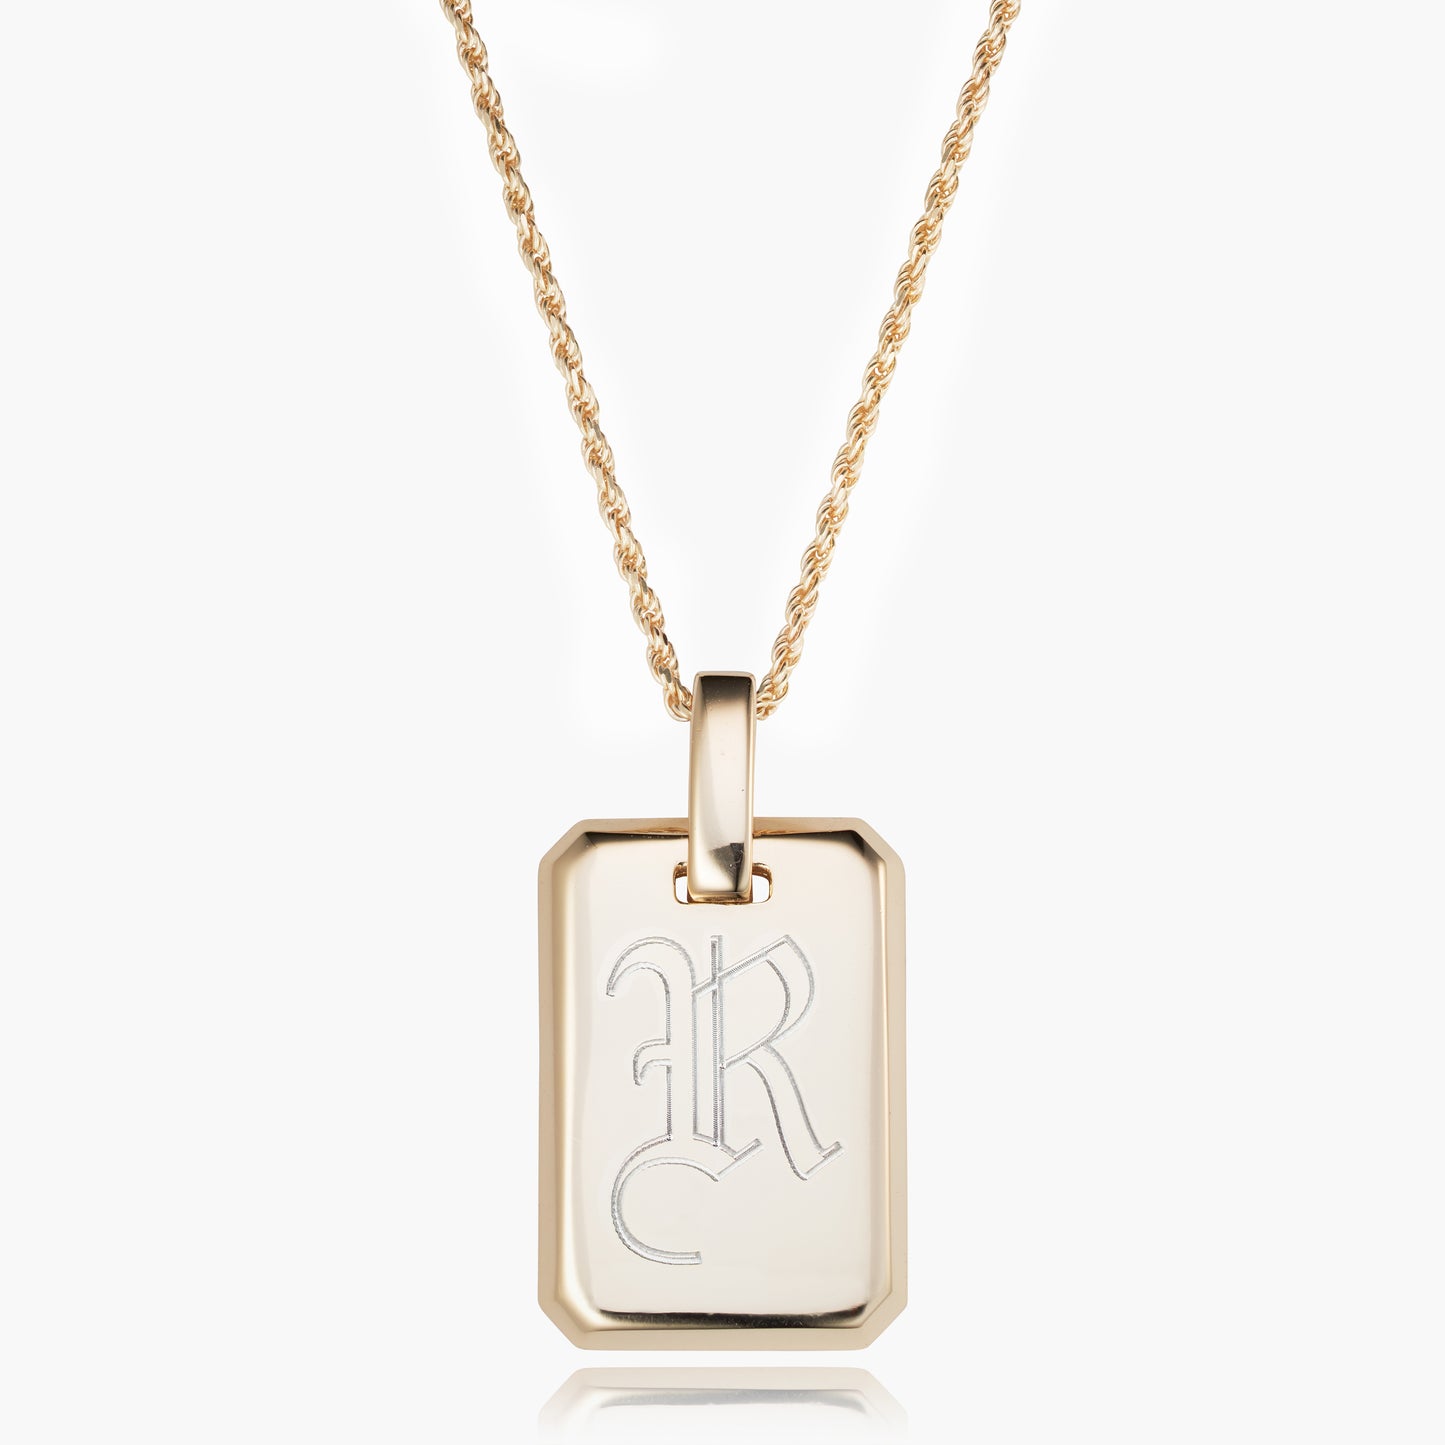 The Square Dog Tag